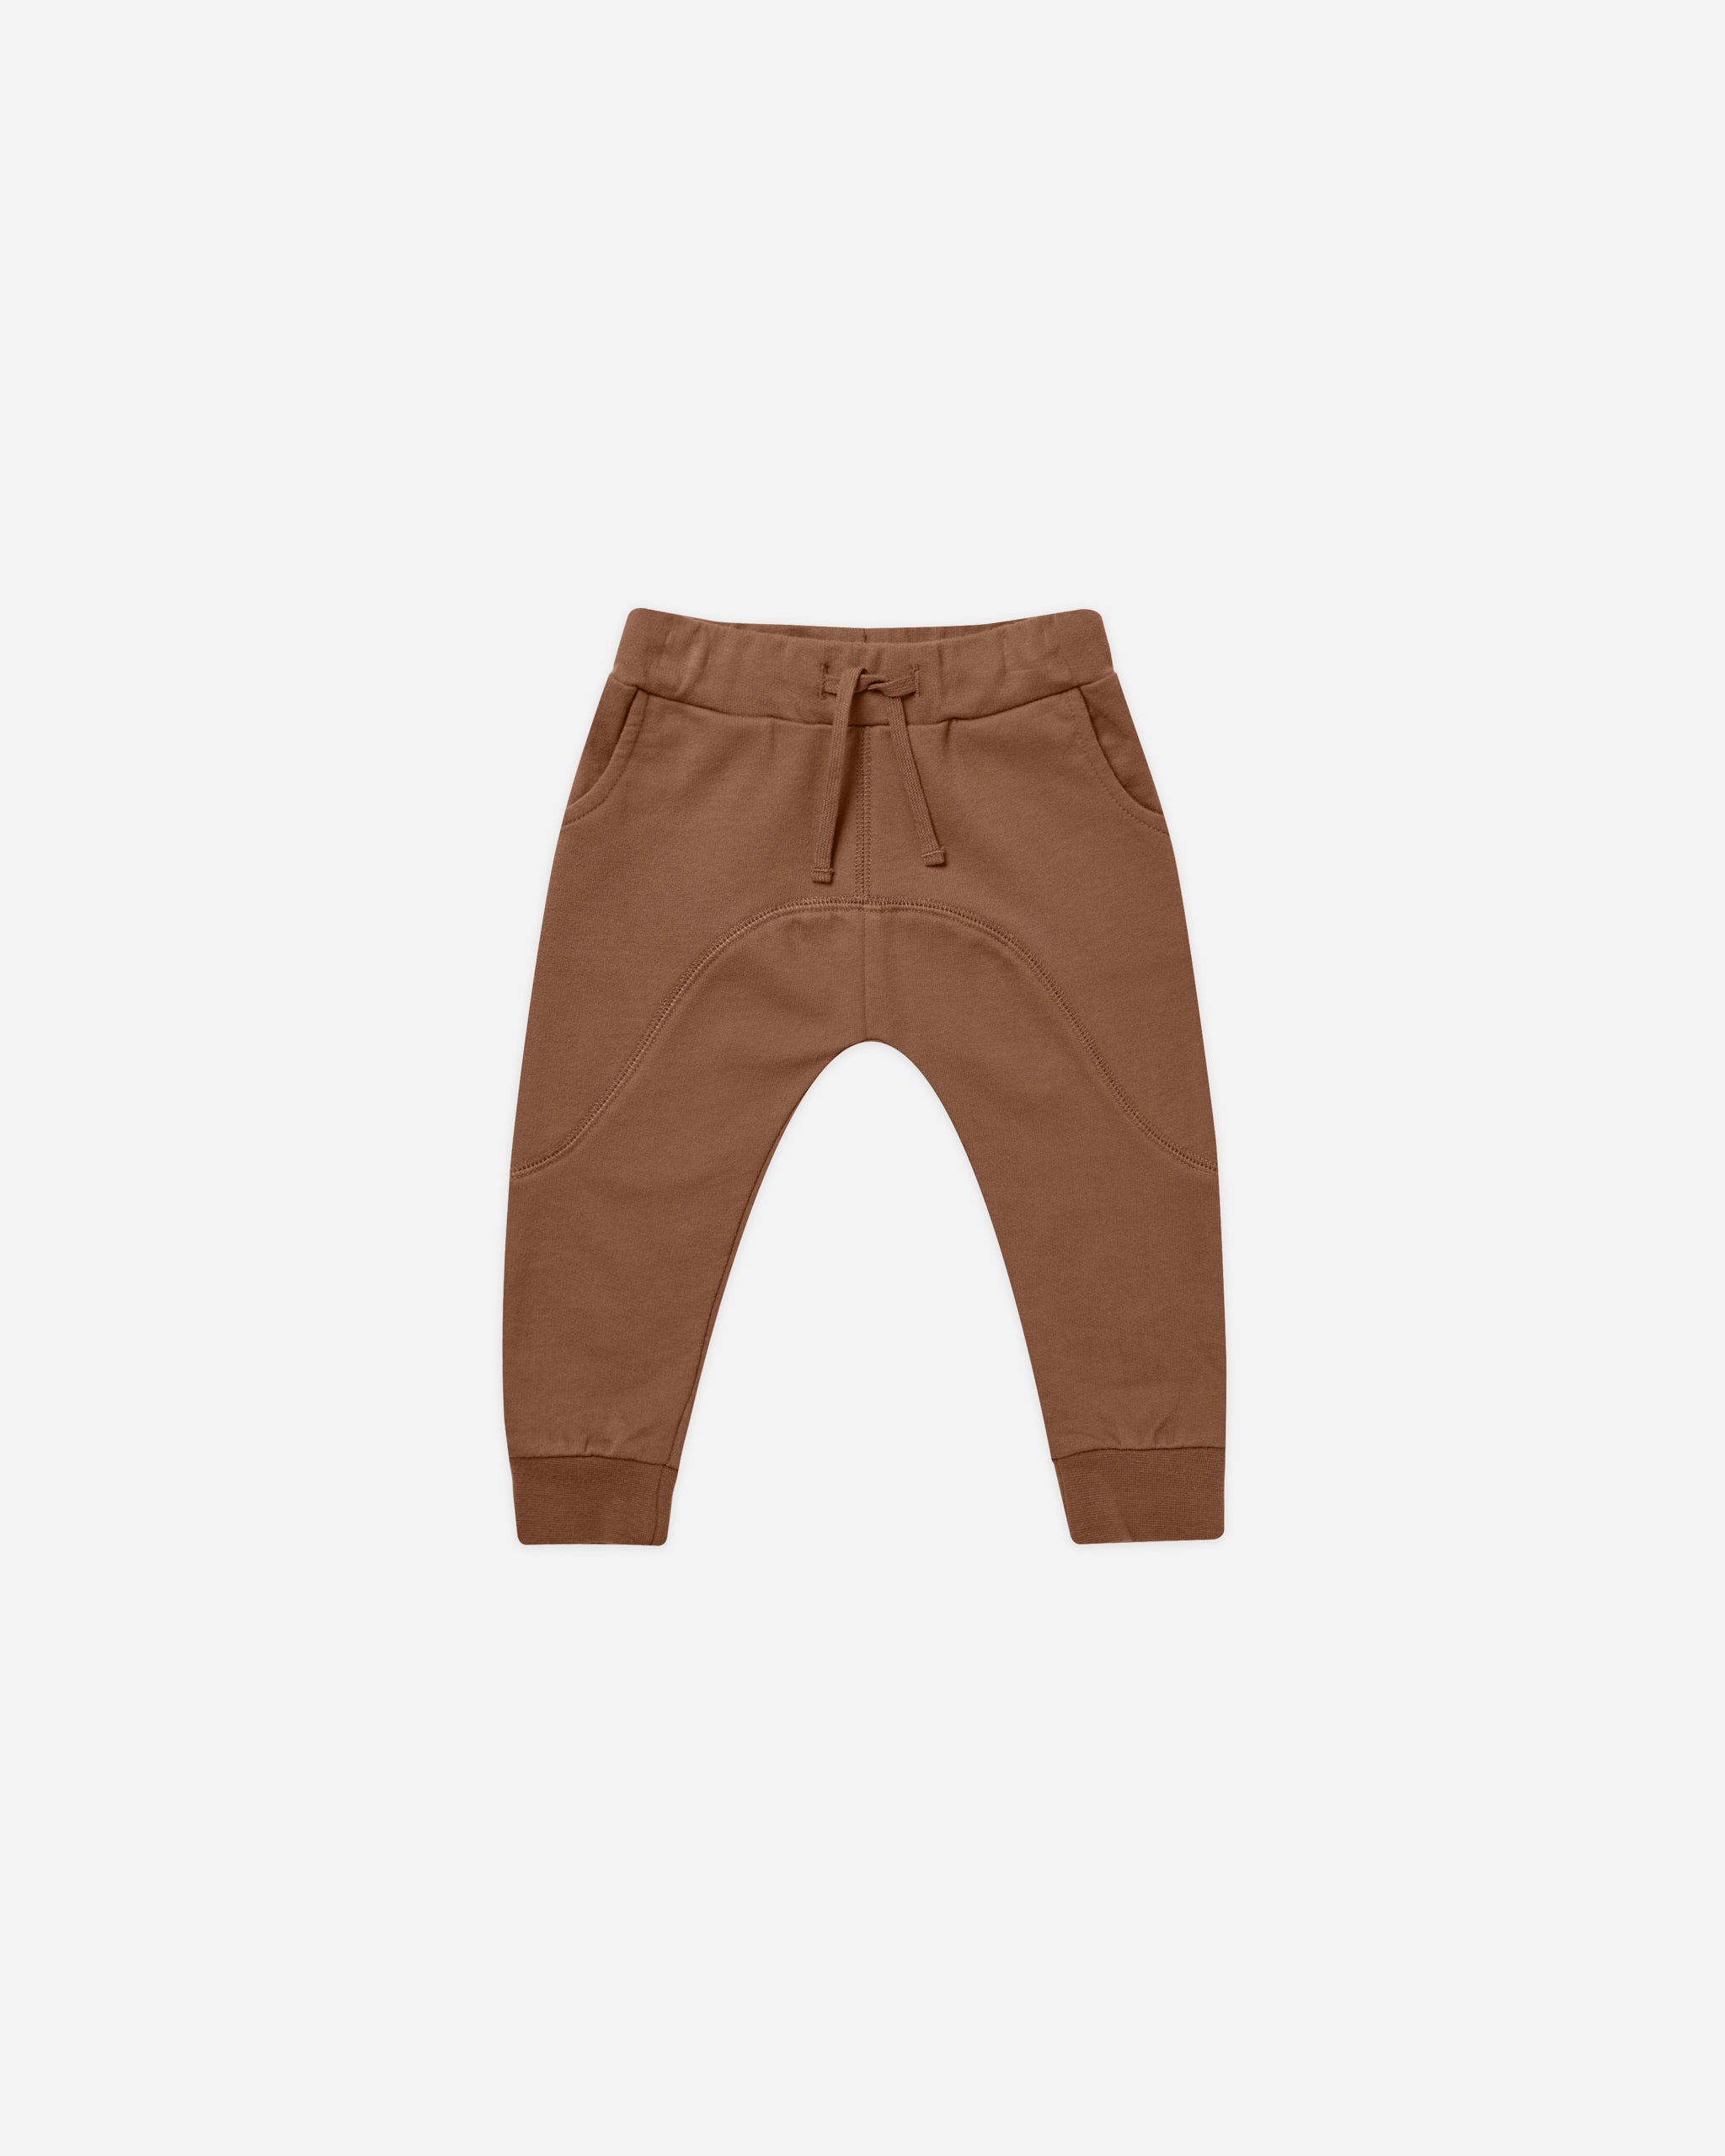 James Pant || Cedar - Rylee + Cru | Kids Clothes | Trendy Baby Clothes | Modern Infant Outfits |